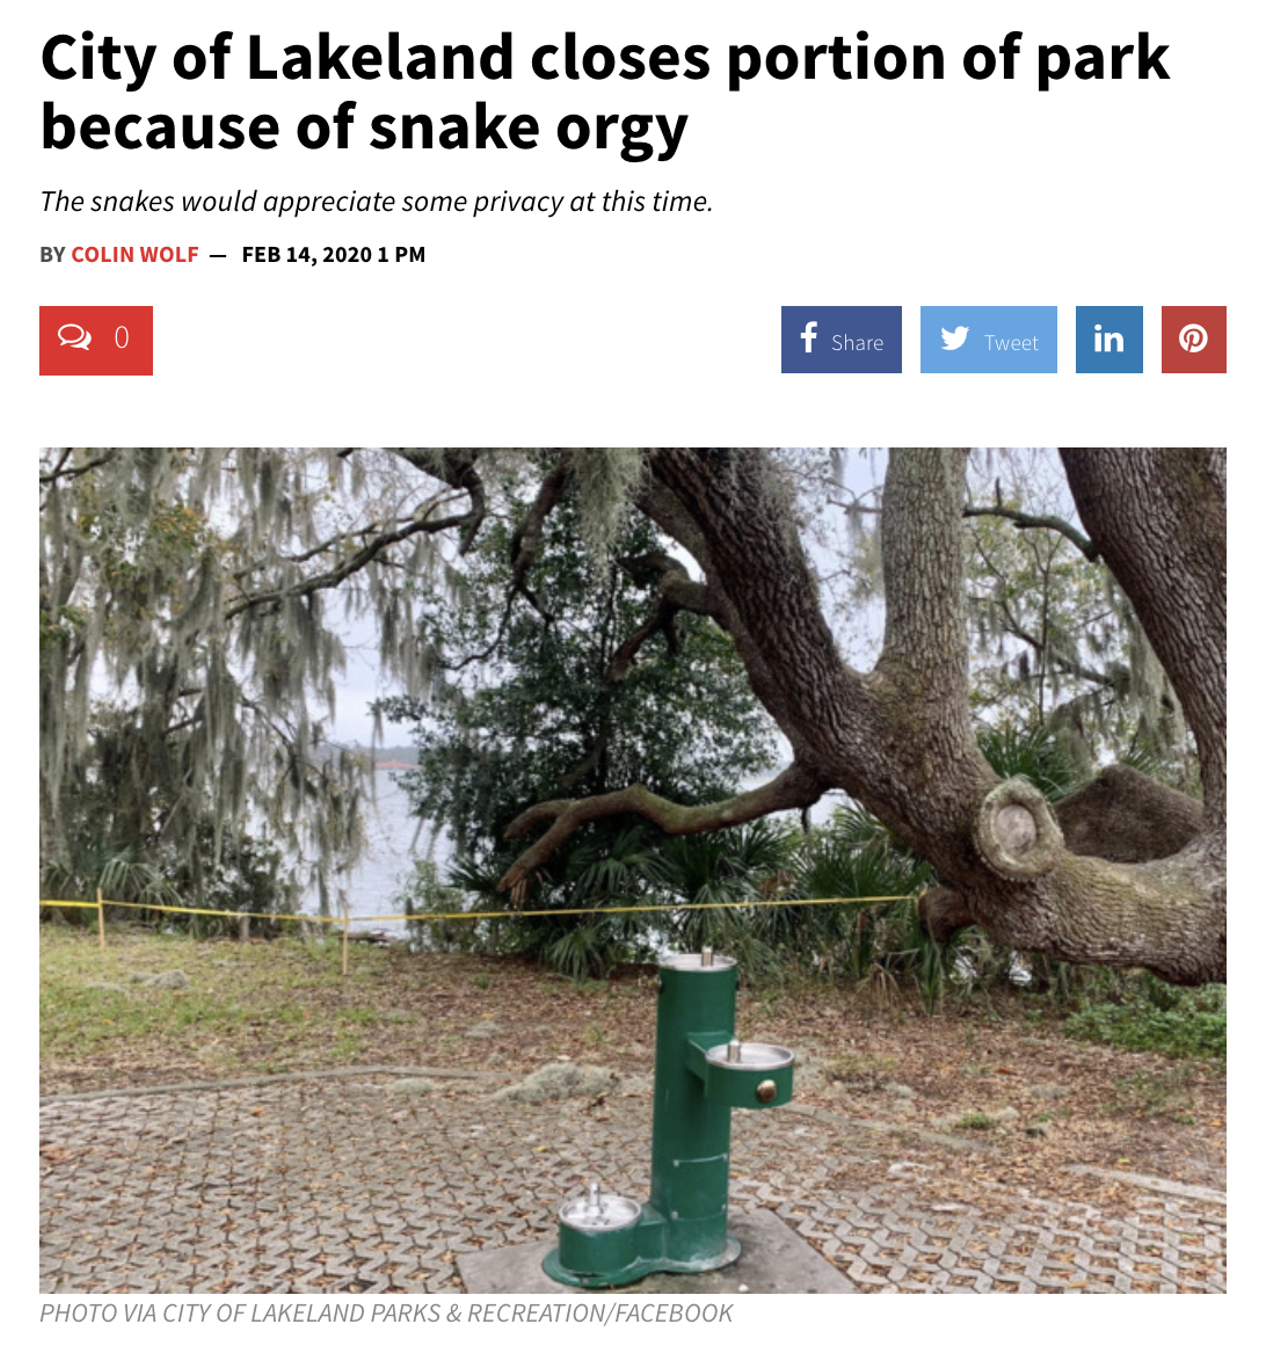 Officials with the City of Lakeland have taped off an area of Lake Hollingsworth after residents noticed a large number of horny snakes. Read More